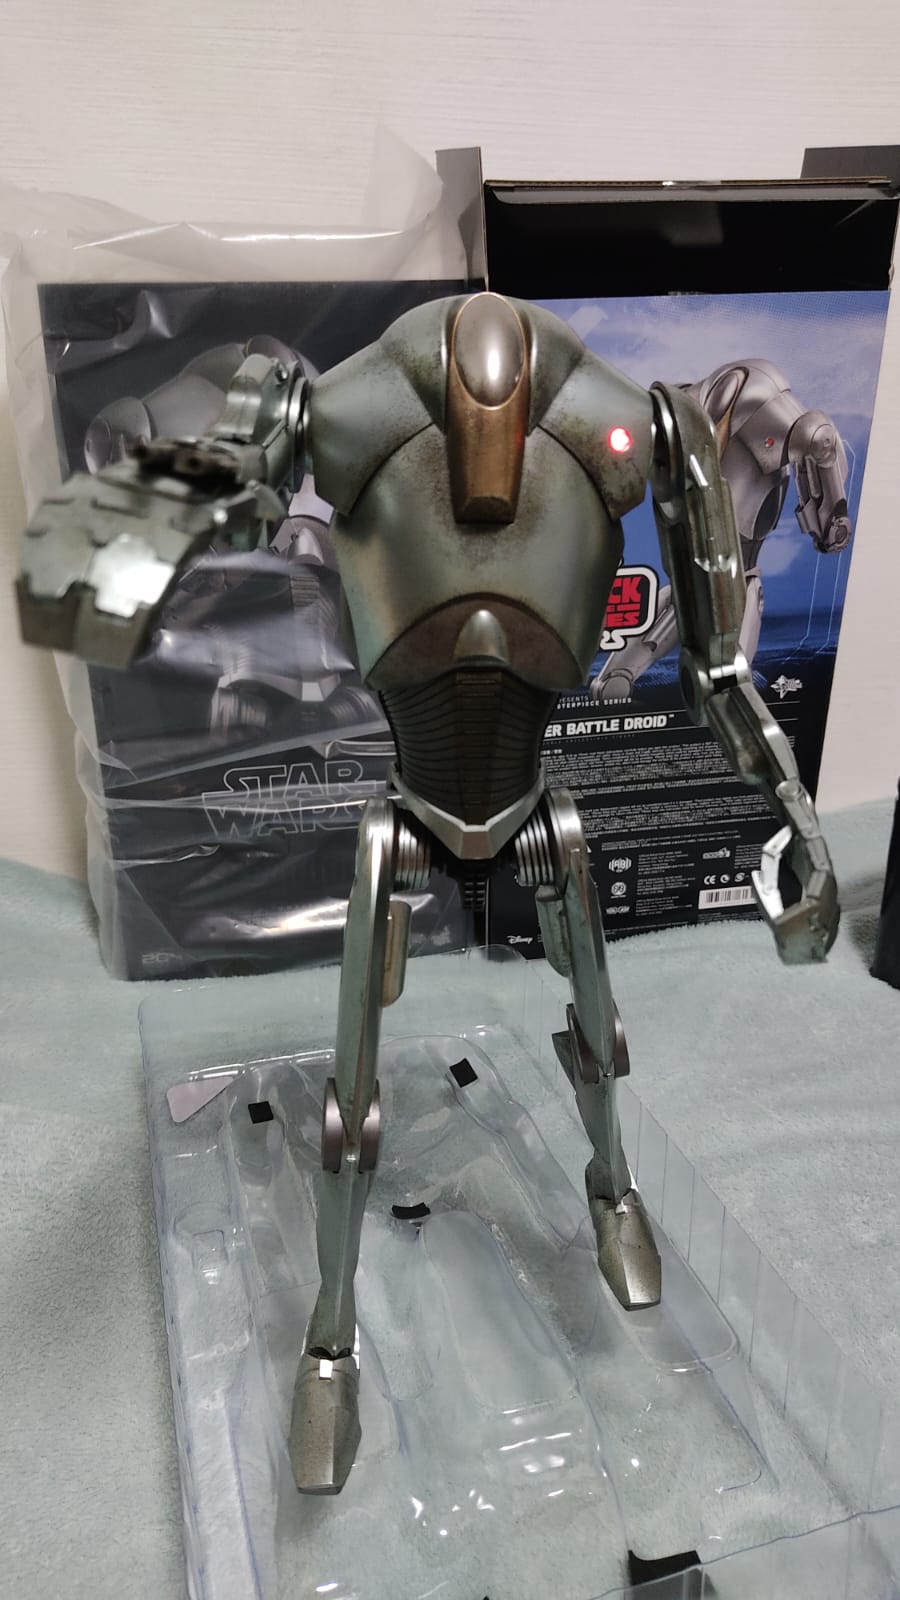 SuperBattleDroid - NEW PRODUCT: HOT TOYS: STAR WARS EPISODE II: ATTACK OF THE CLONES™ SUPER BATTLE DROID™ 1/6TH SCALE COLLECTIBLE FIGURE Whats164